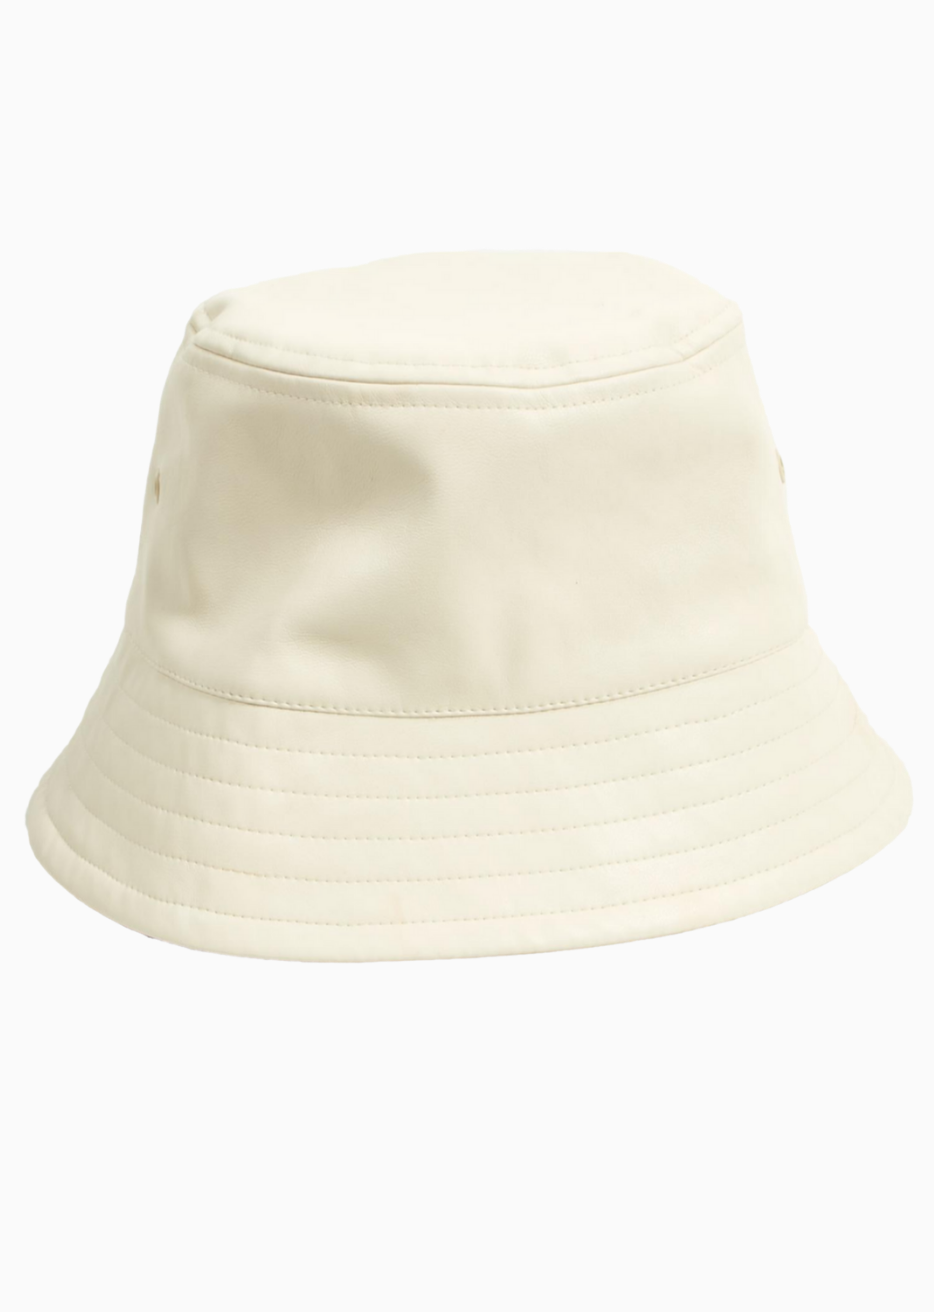 Mini Bucket Hat Kids White Champagne Conscious Production Canada Vegan Leather